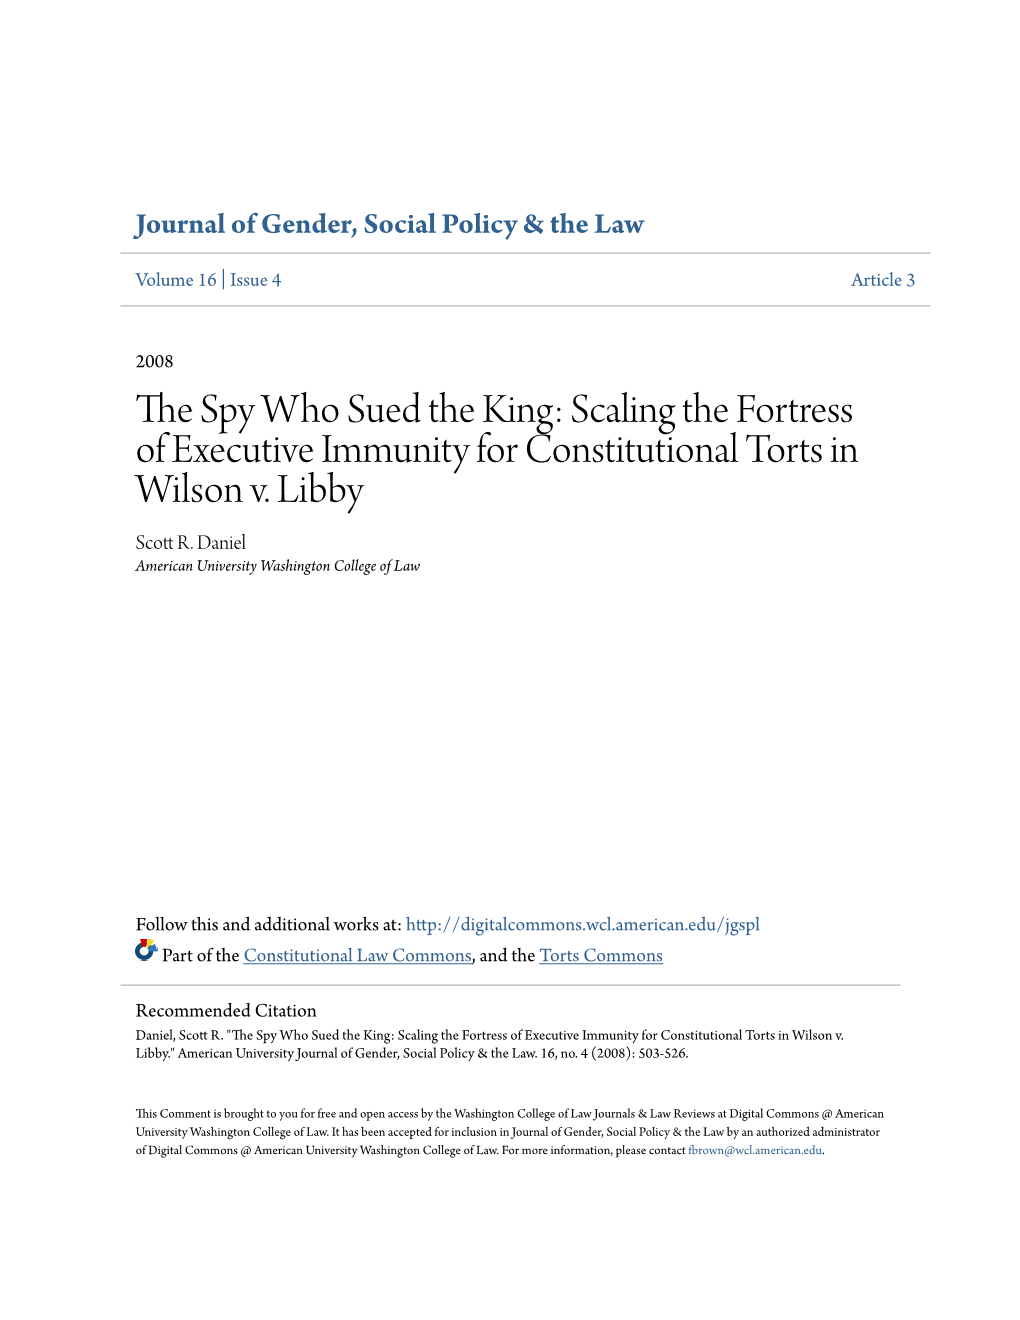 Scaling the Fortress of Executive Immunity for Constitutional Torts in Wilson V